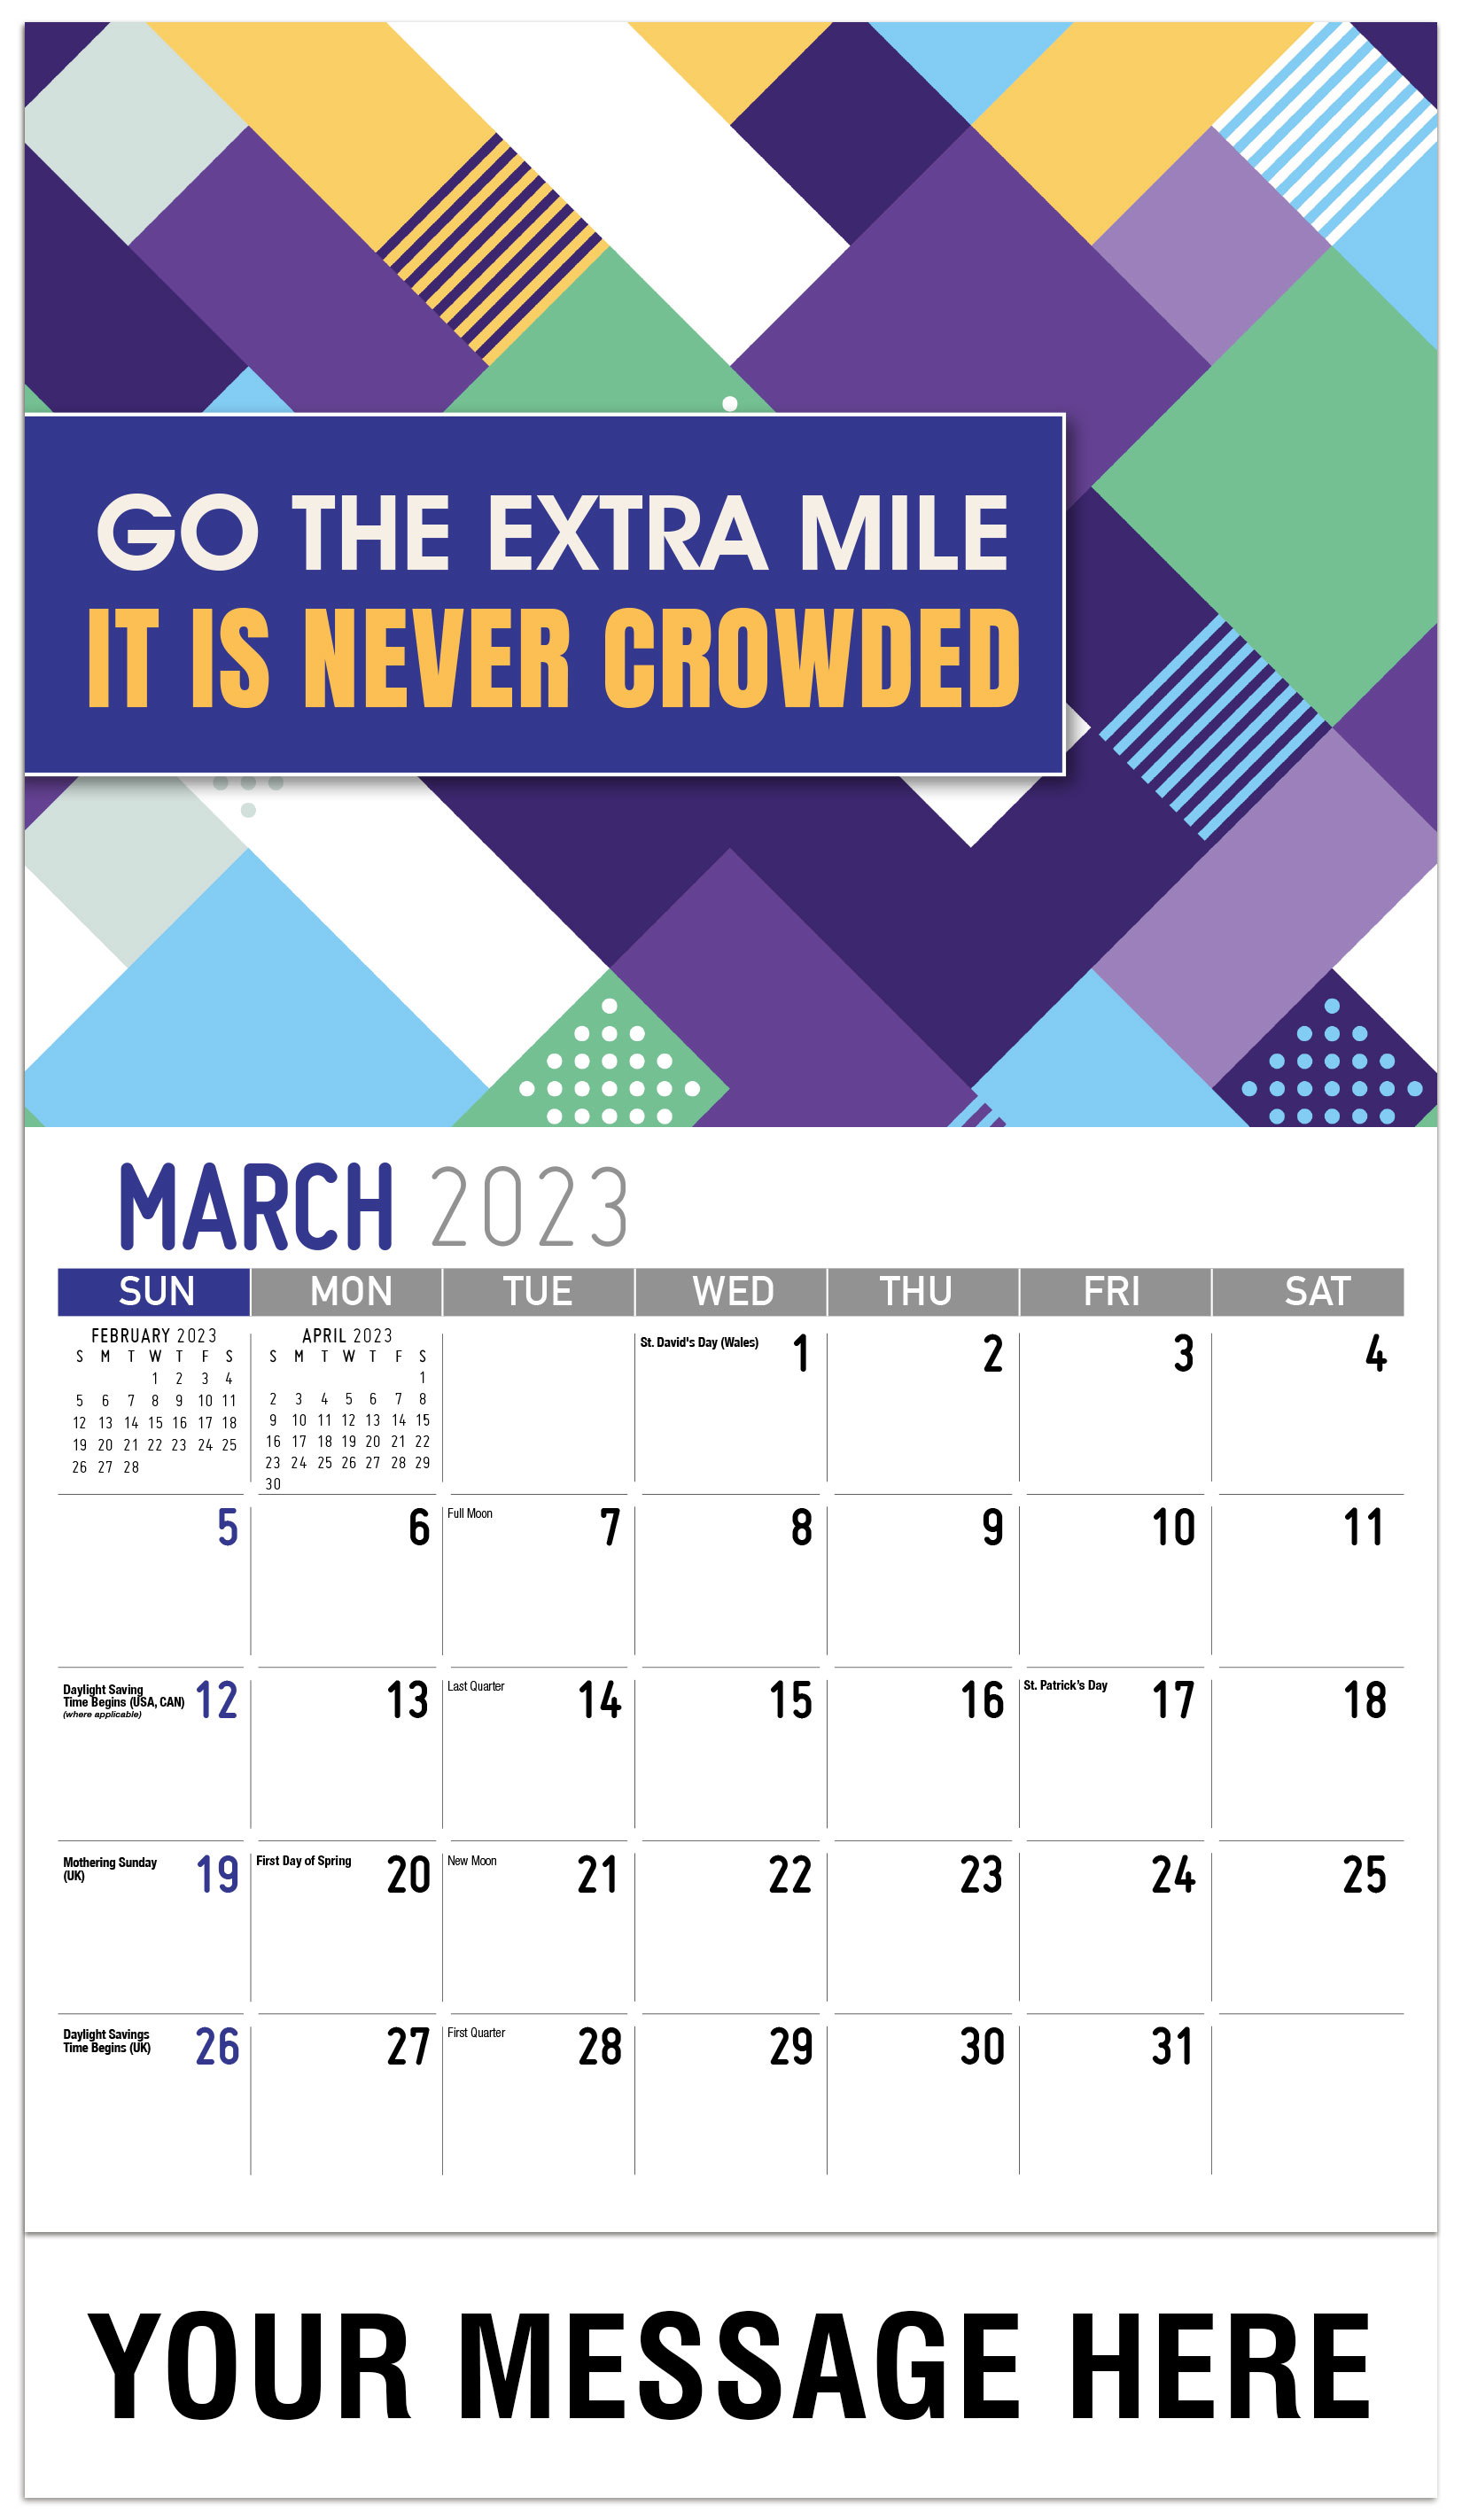 Go The Extra Mile 
It Is Never Crowded - March - Arts and Thoughts 2023 Promotional Calendar